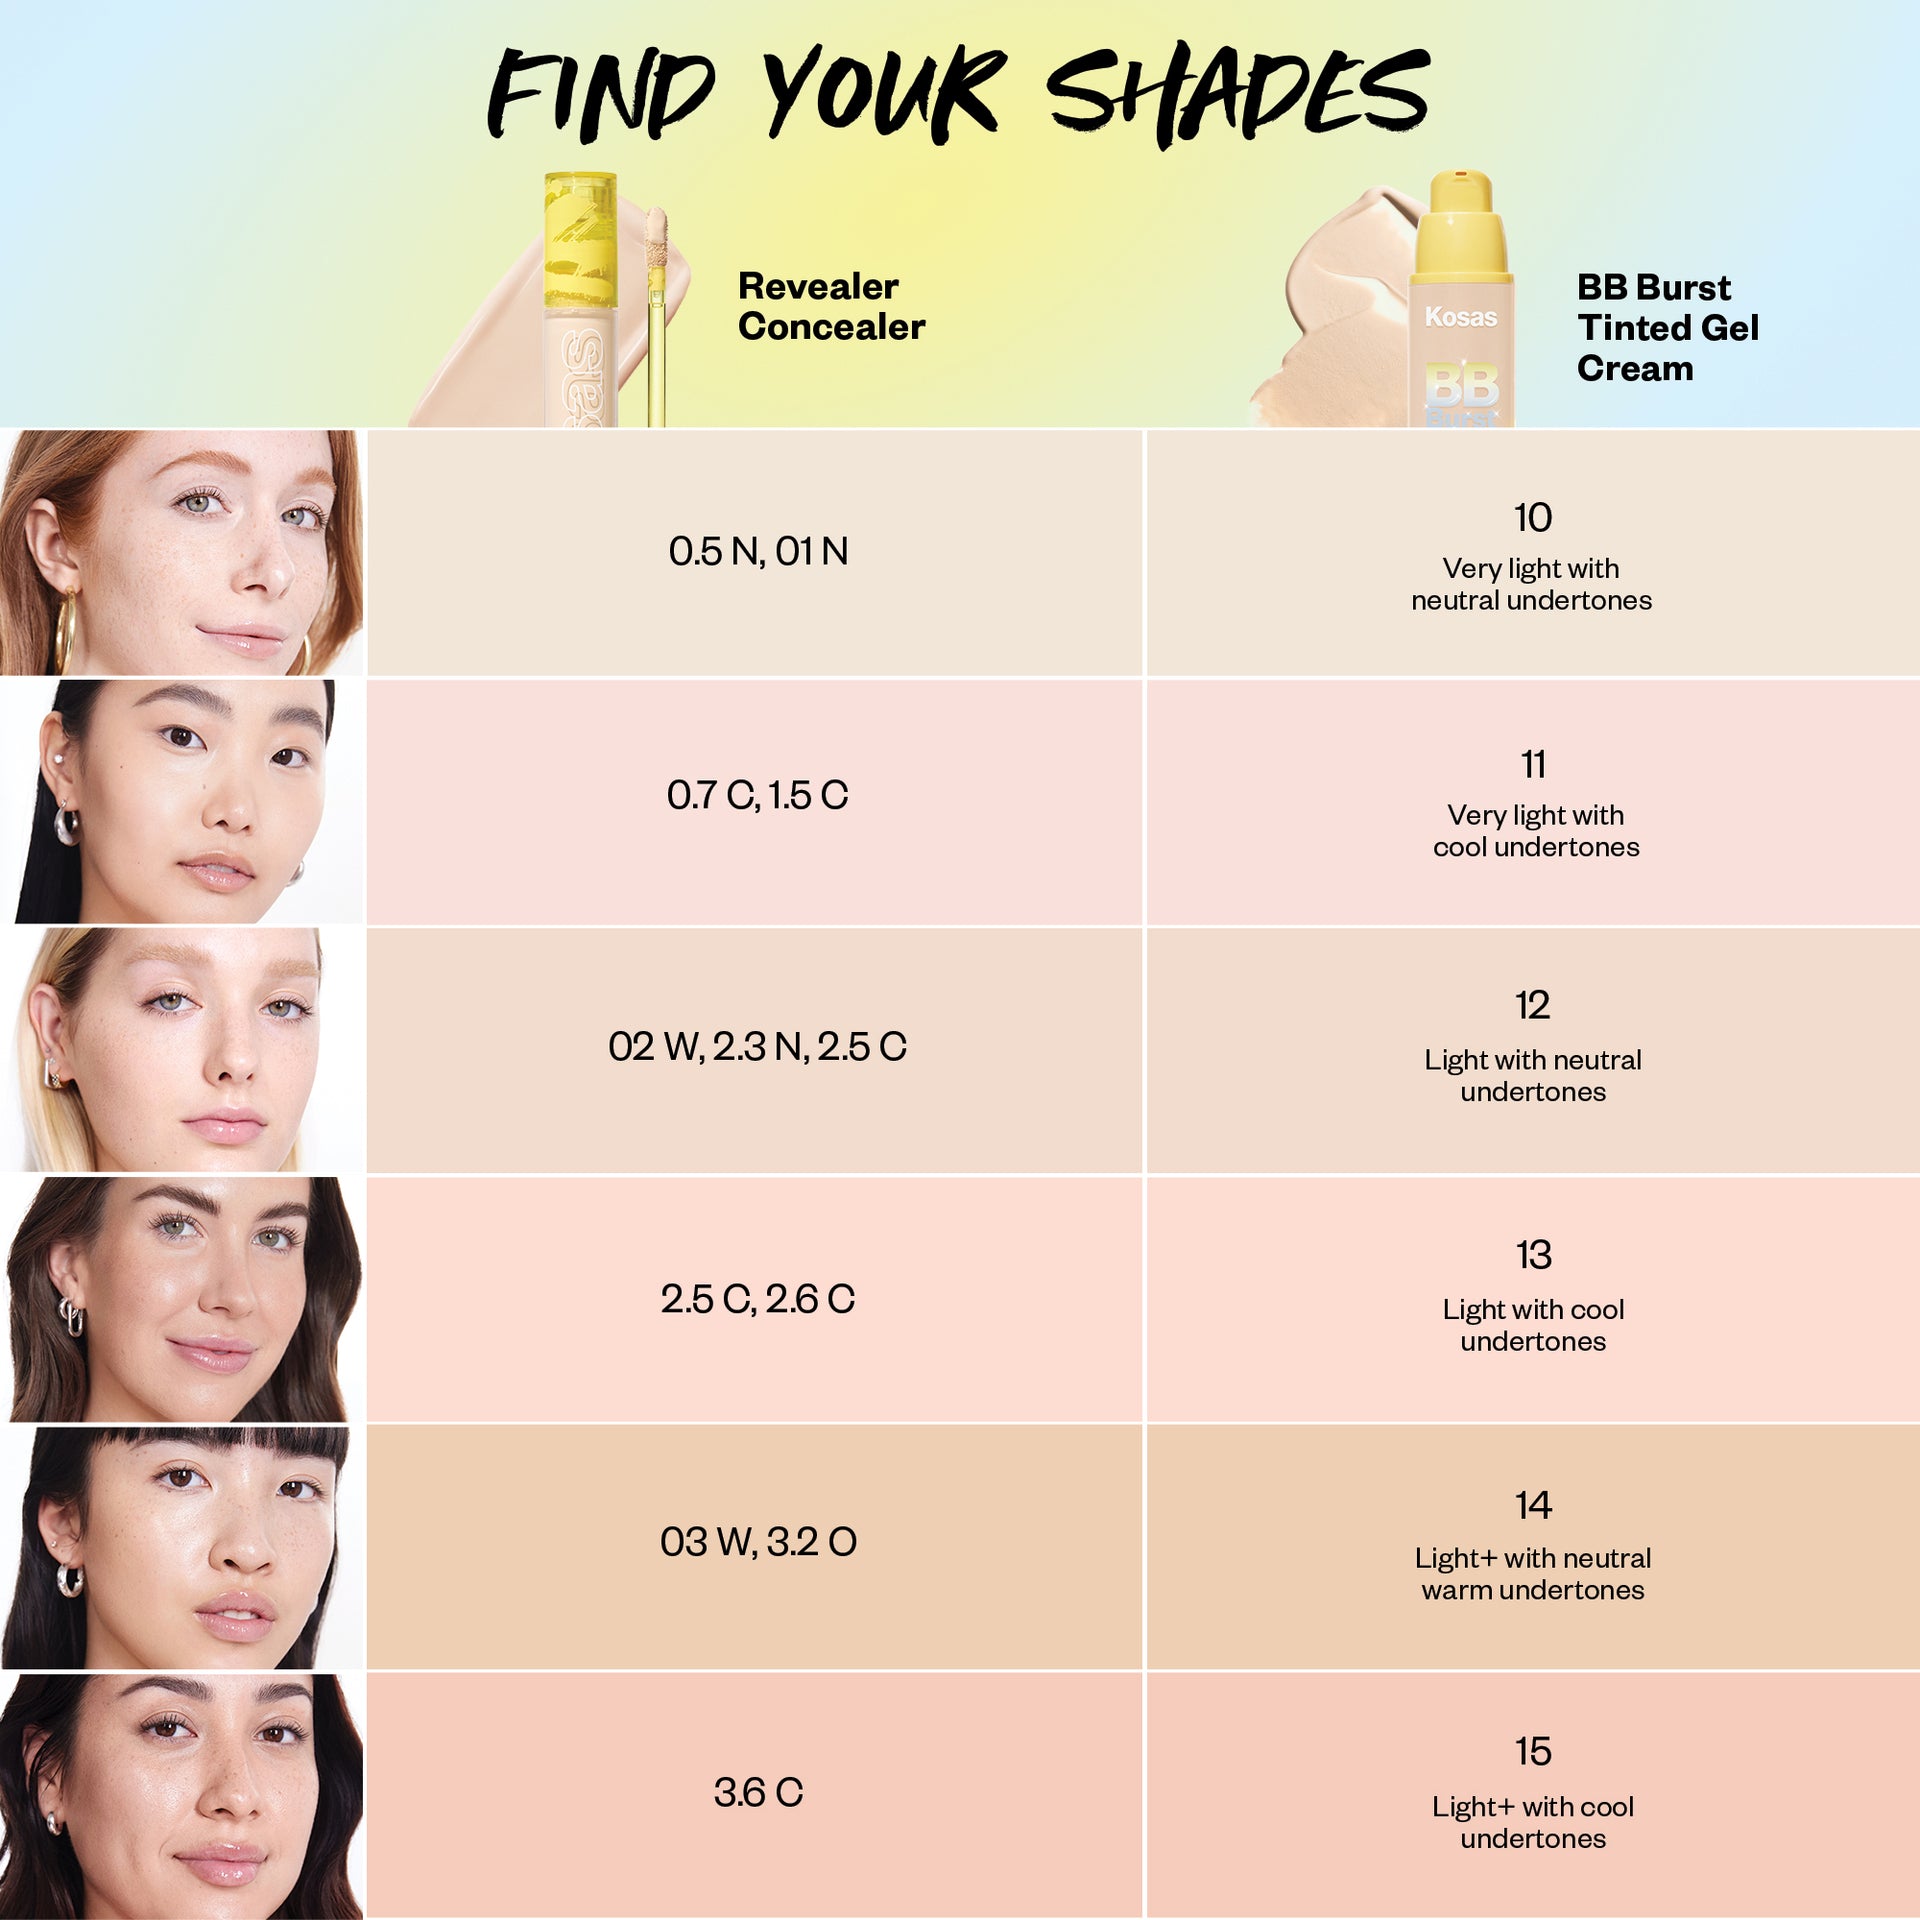 Find your shades. Revealer concealer and BB Burst tinted gel cream. 05 N, 01 N = 10 very light with neutral undertones. 0.7 C, 1.5 C = 11 Very light with cold undertones. 02 W, 2.3 N, 2.5 C = 12 Light with neutral undertones. 2.5 C, 2.6 C = 13 light with cool undertones. 03 W, 3.2 O = 14 Light+ with neutral warm undertones. 3.6 C = Light+ with cool undertones.